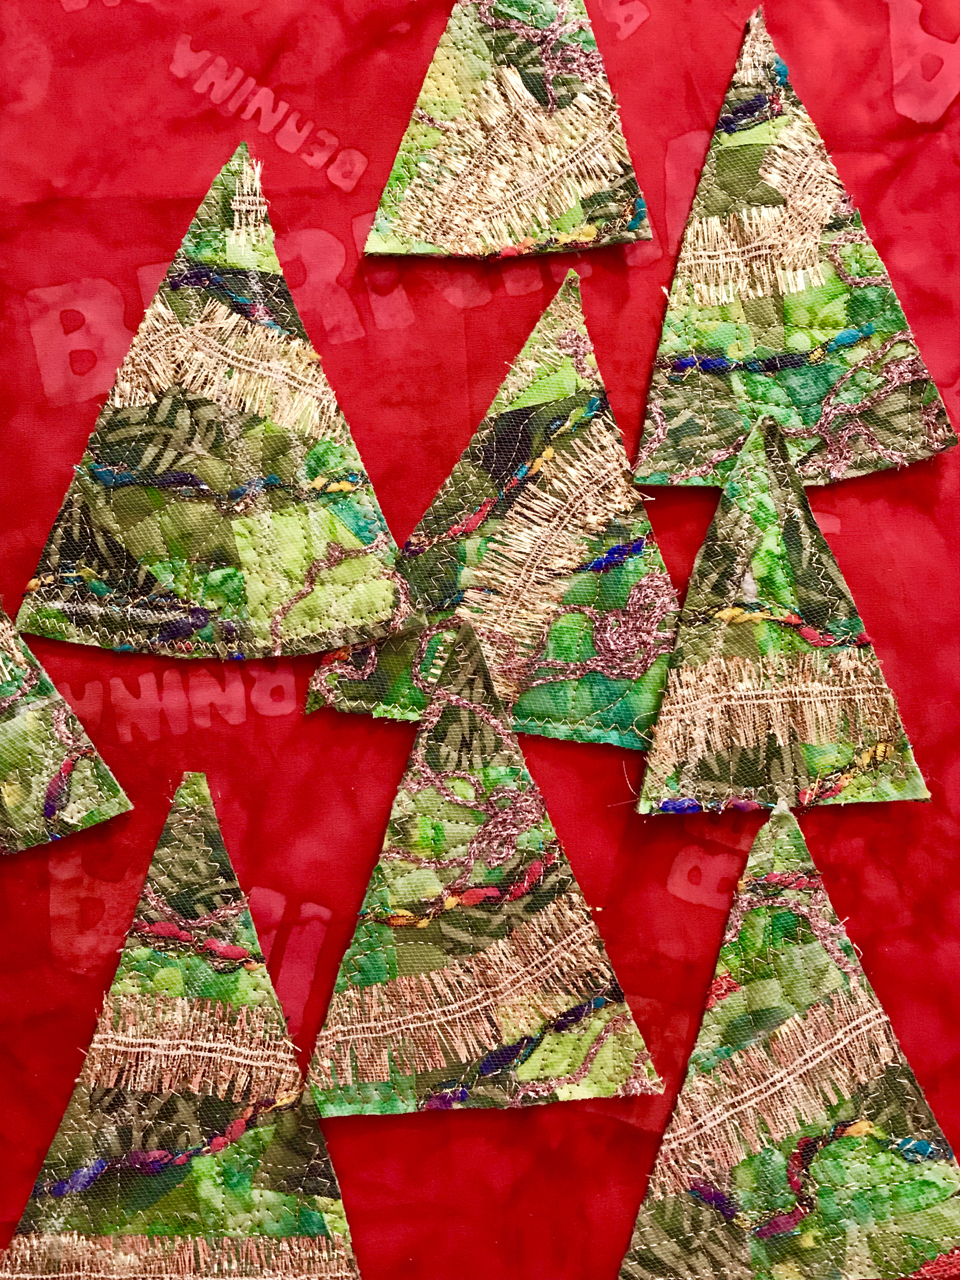 Stitched Collage Cards - Cut out tree shaped triangles